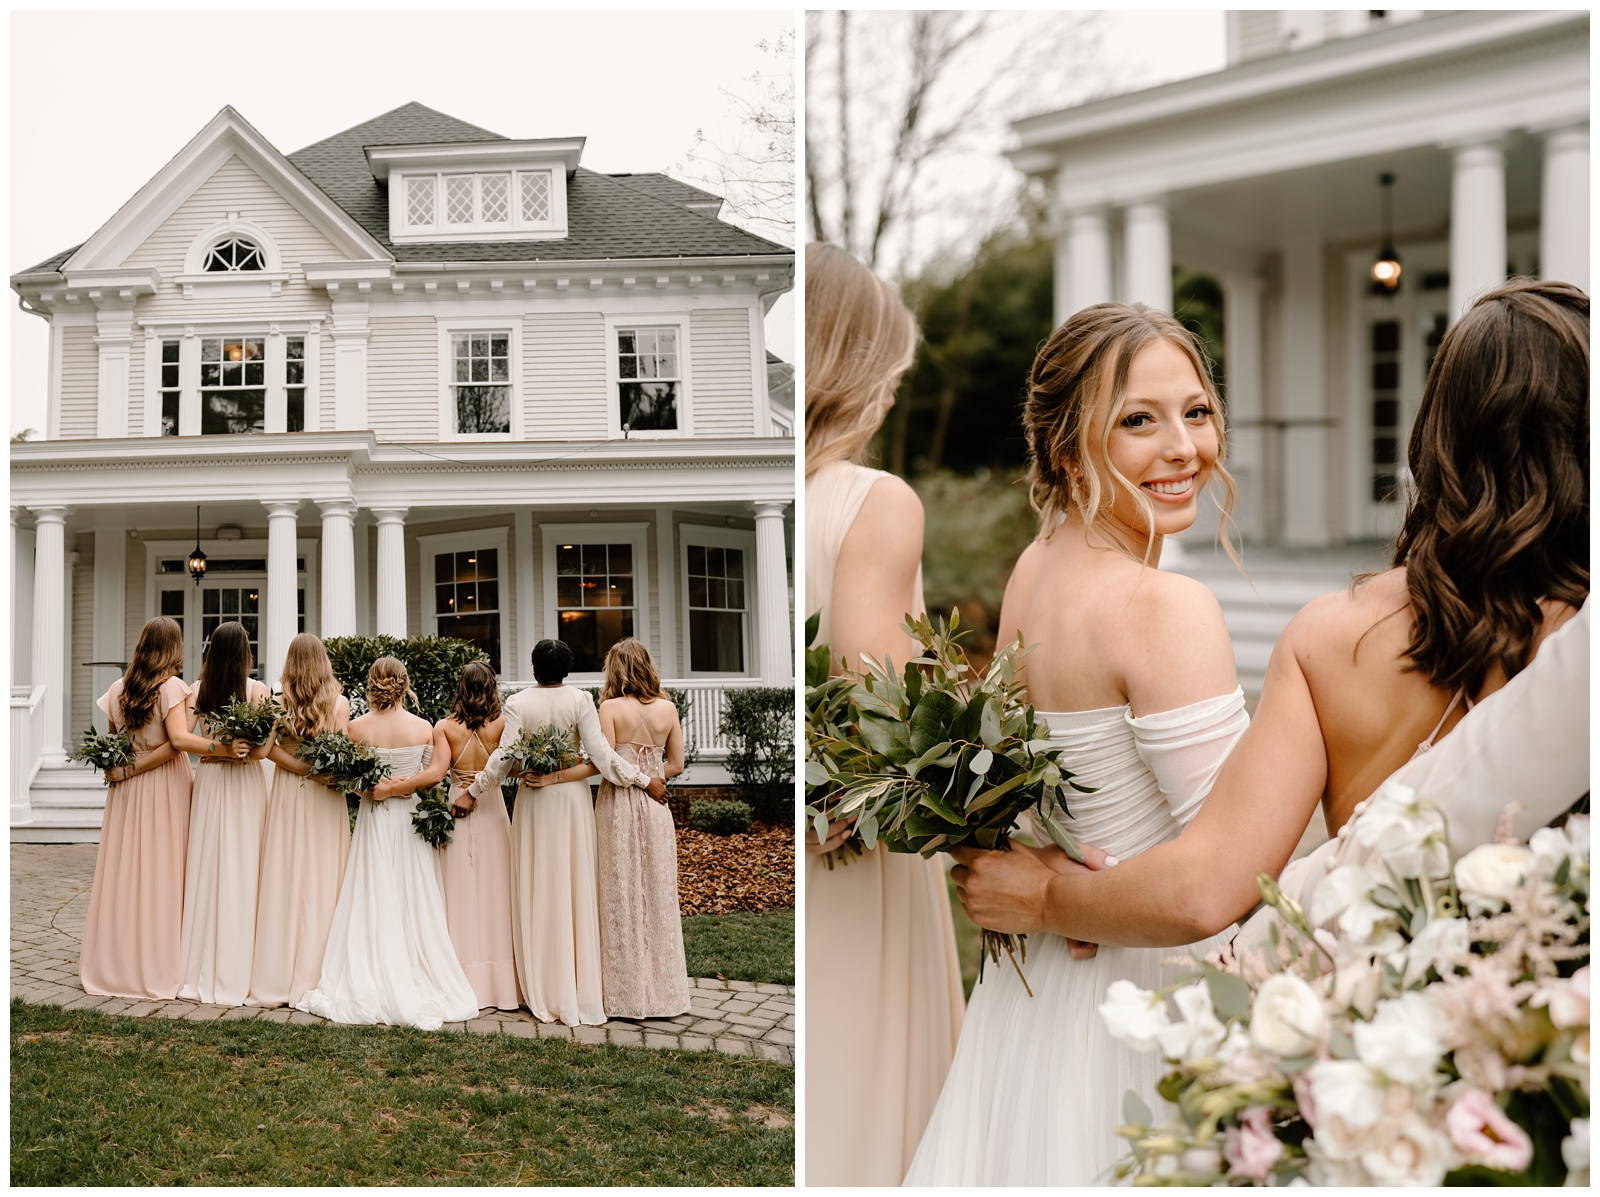 Bride and bridesmaids portraits with blush dresses in Greensboro, NC at the McAlister-Leftwich House by North Carolina wedding photographer